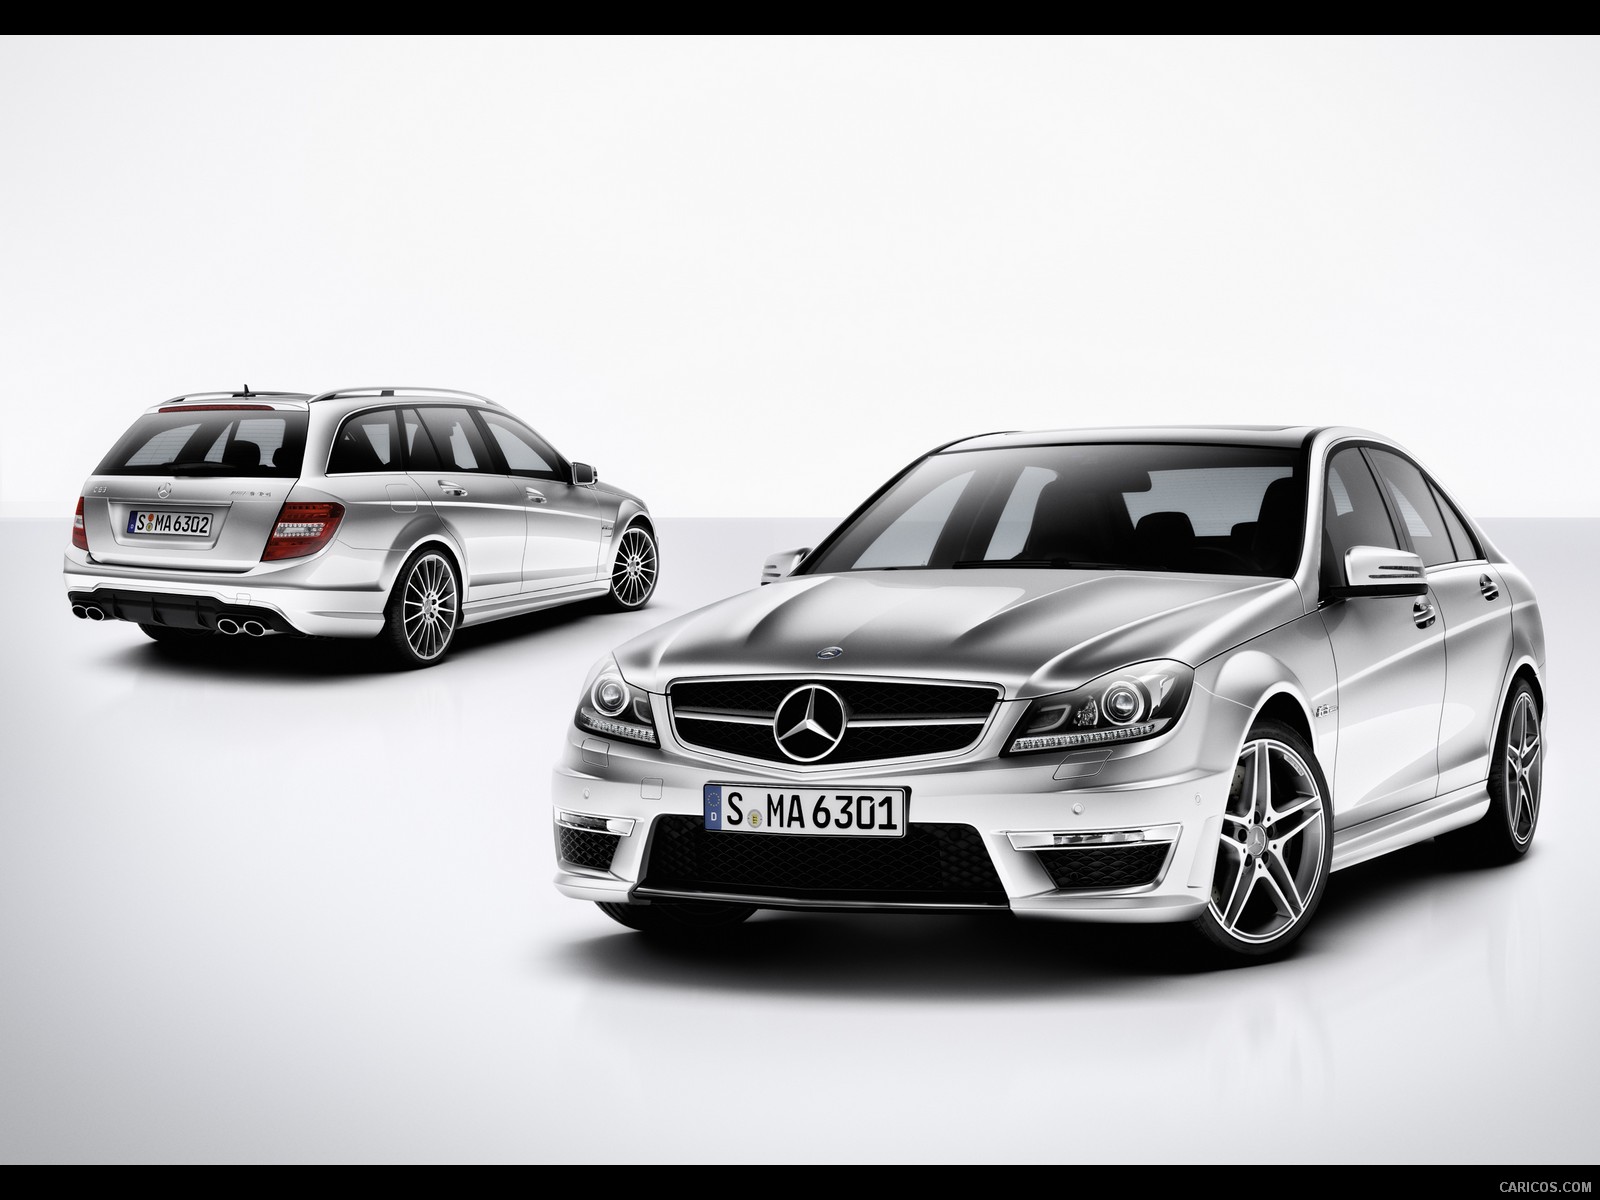 Mercedes-Benz C63 AMG (2012) and Estate - , #19 of 22